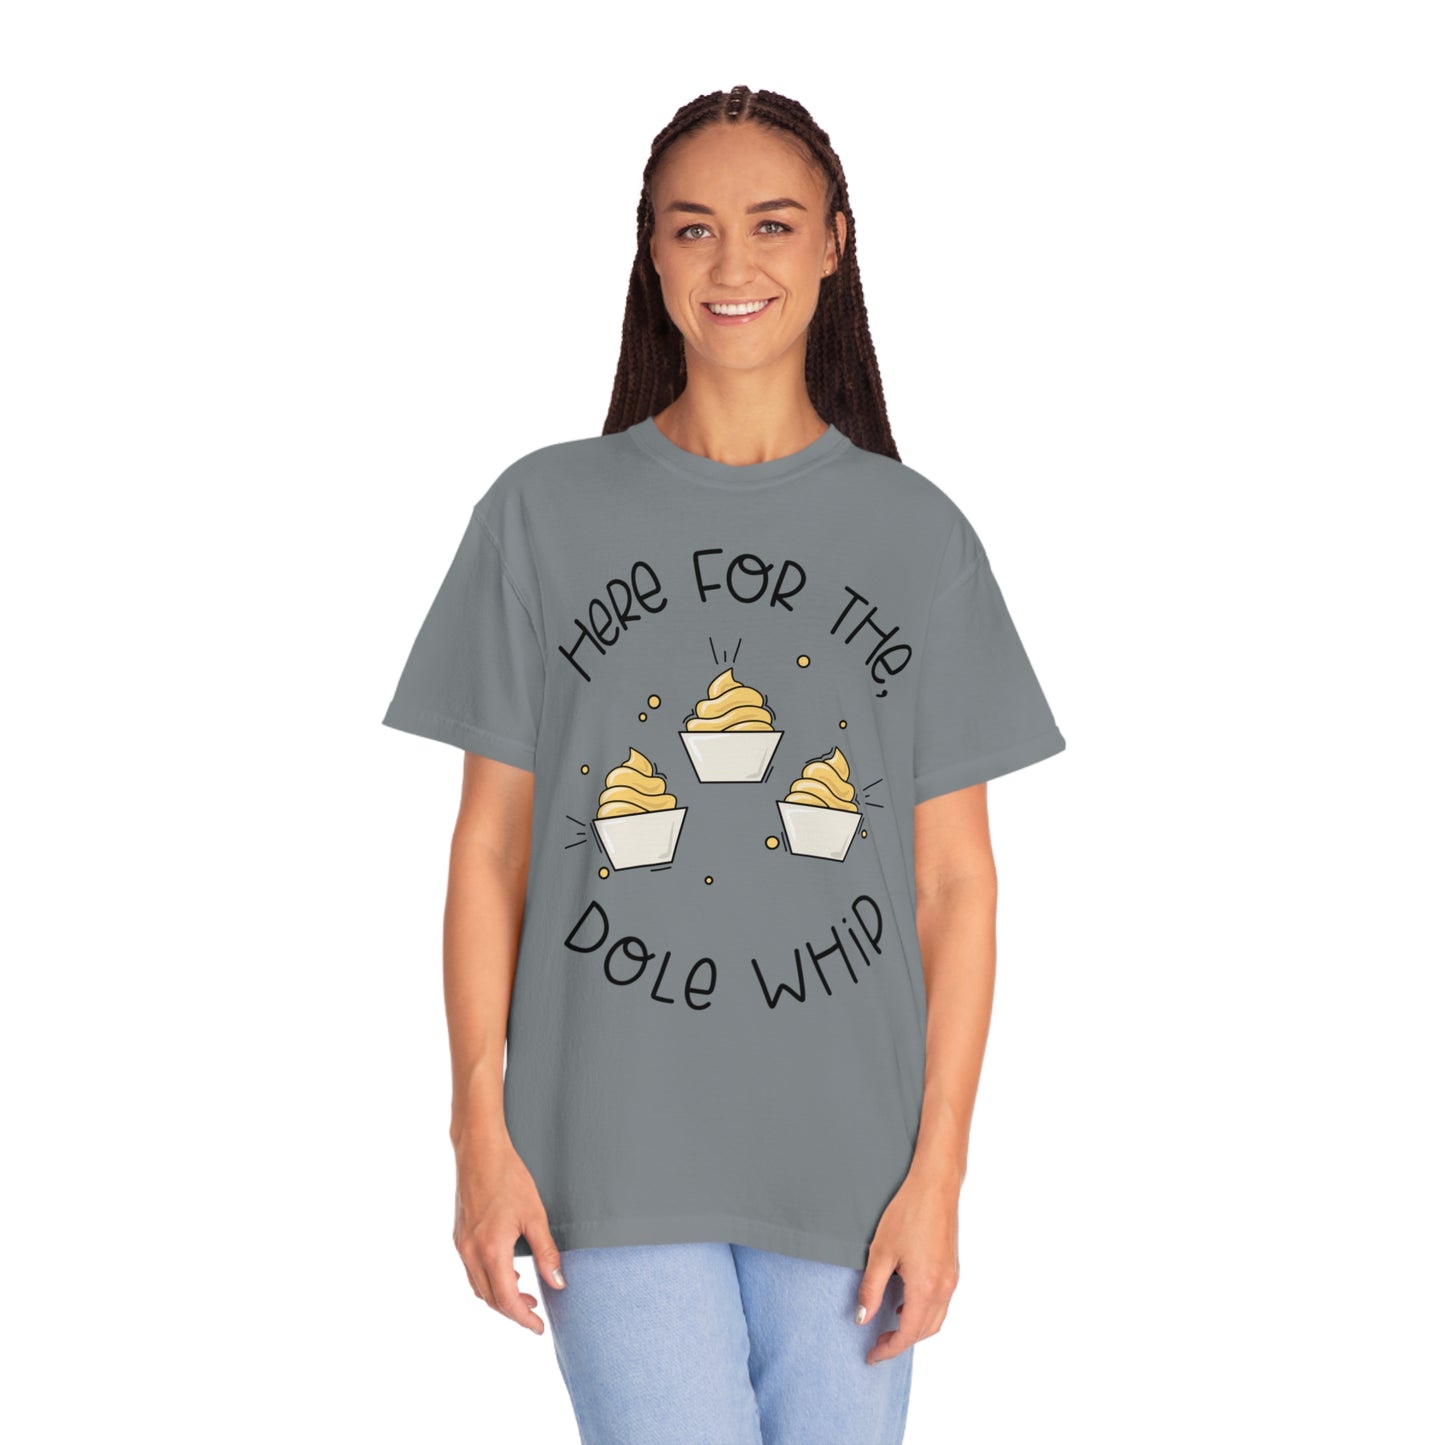 Adult Here for the Dole Whip Tee - Comfort Colors